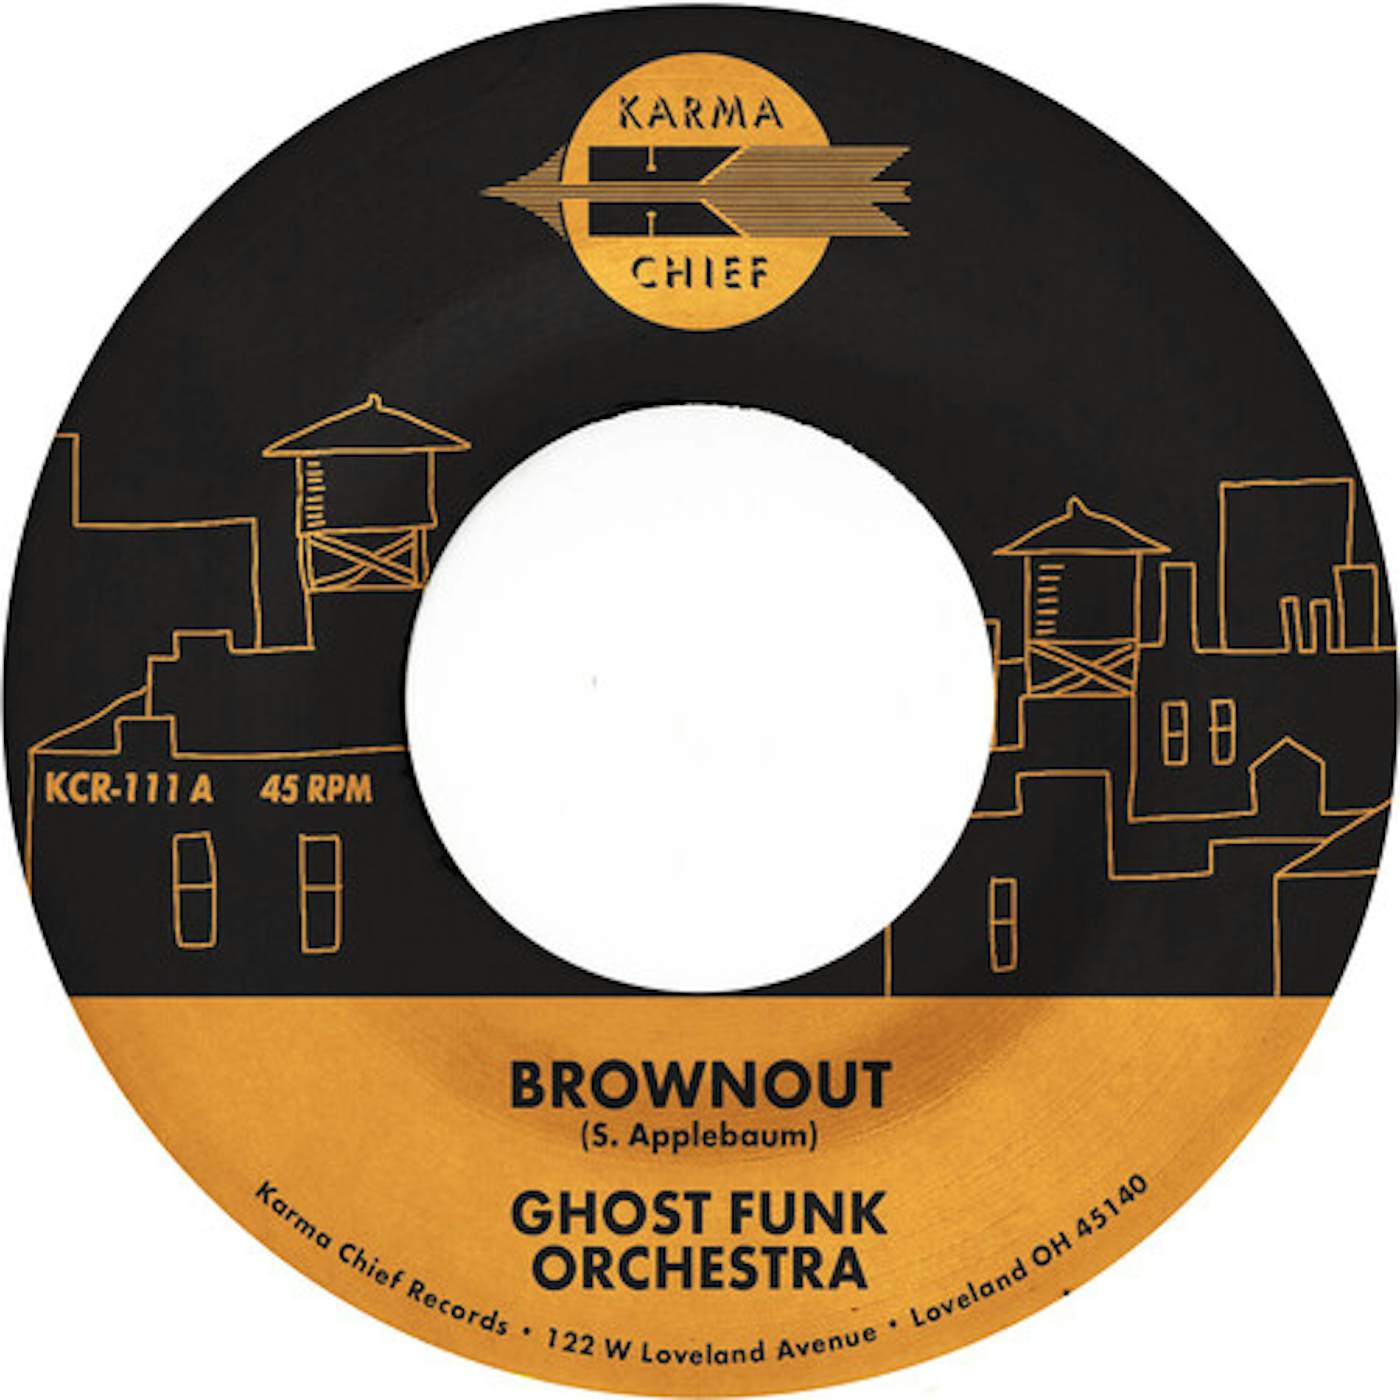 Ghost Funk Orchestra BROWNOUT / BONEYARD BAILE - FIRE RED Vinyl Record